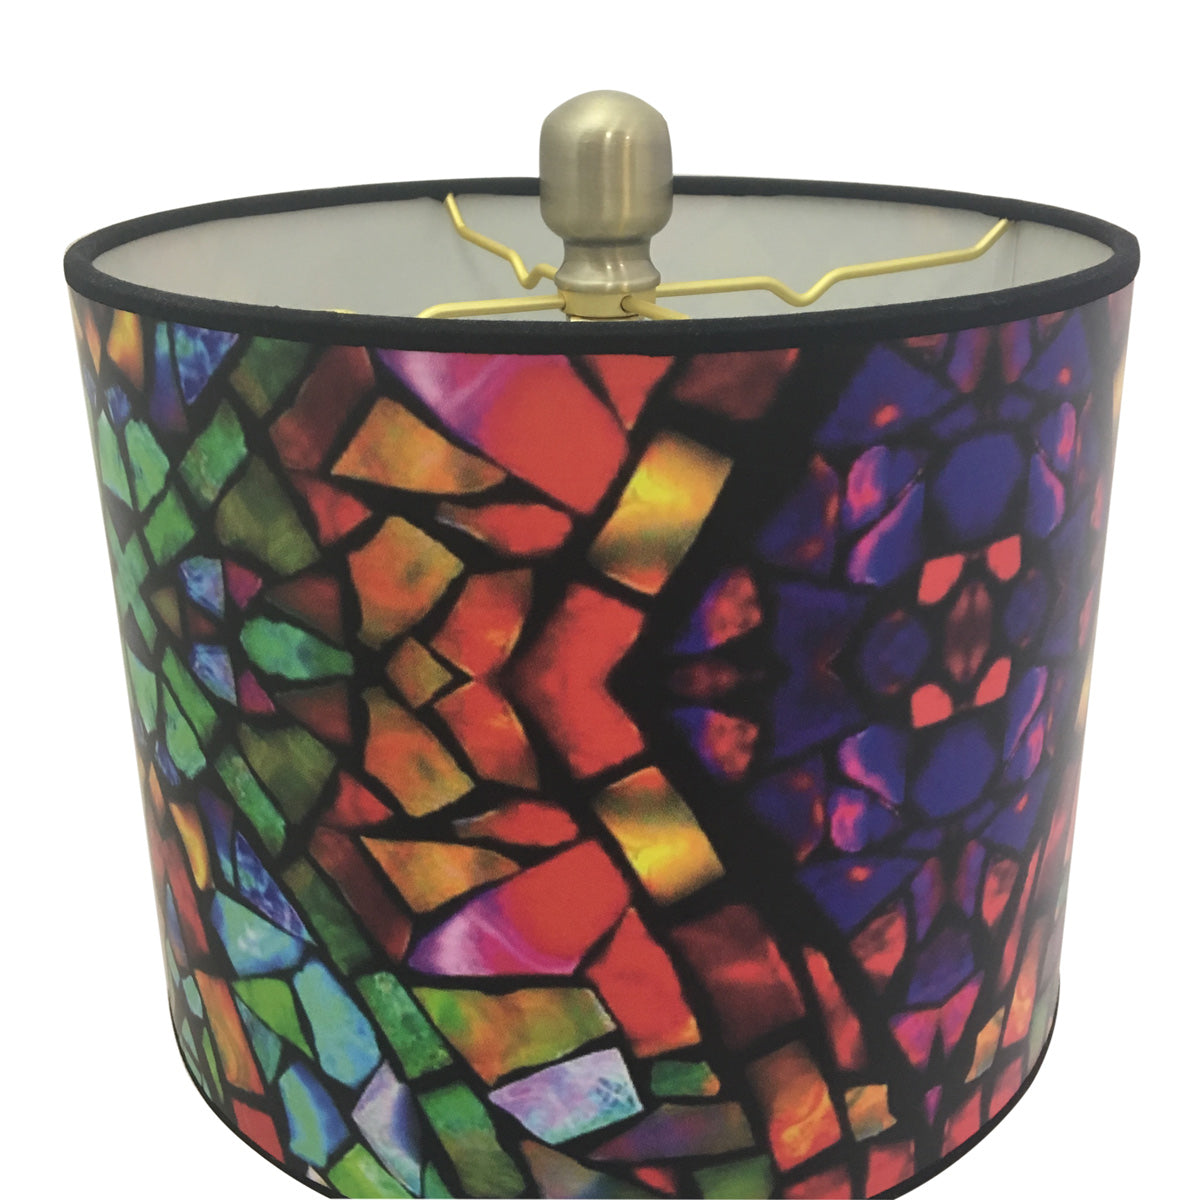 Royal Designs 28" Crystal and Antique Brass Buffet Lamp with Mosaic Stained Glass Design Hardback Lamp Shade